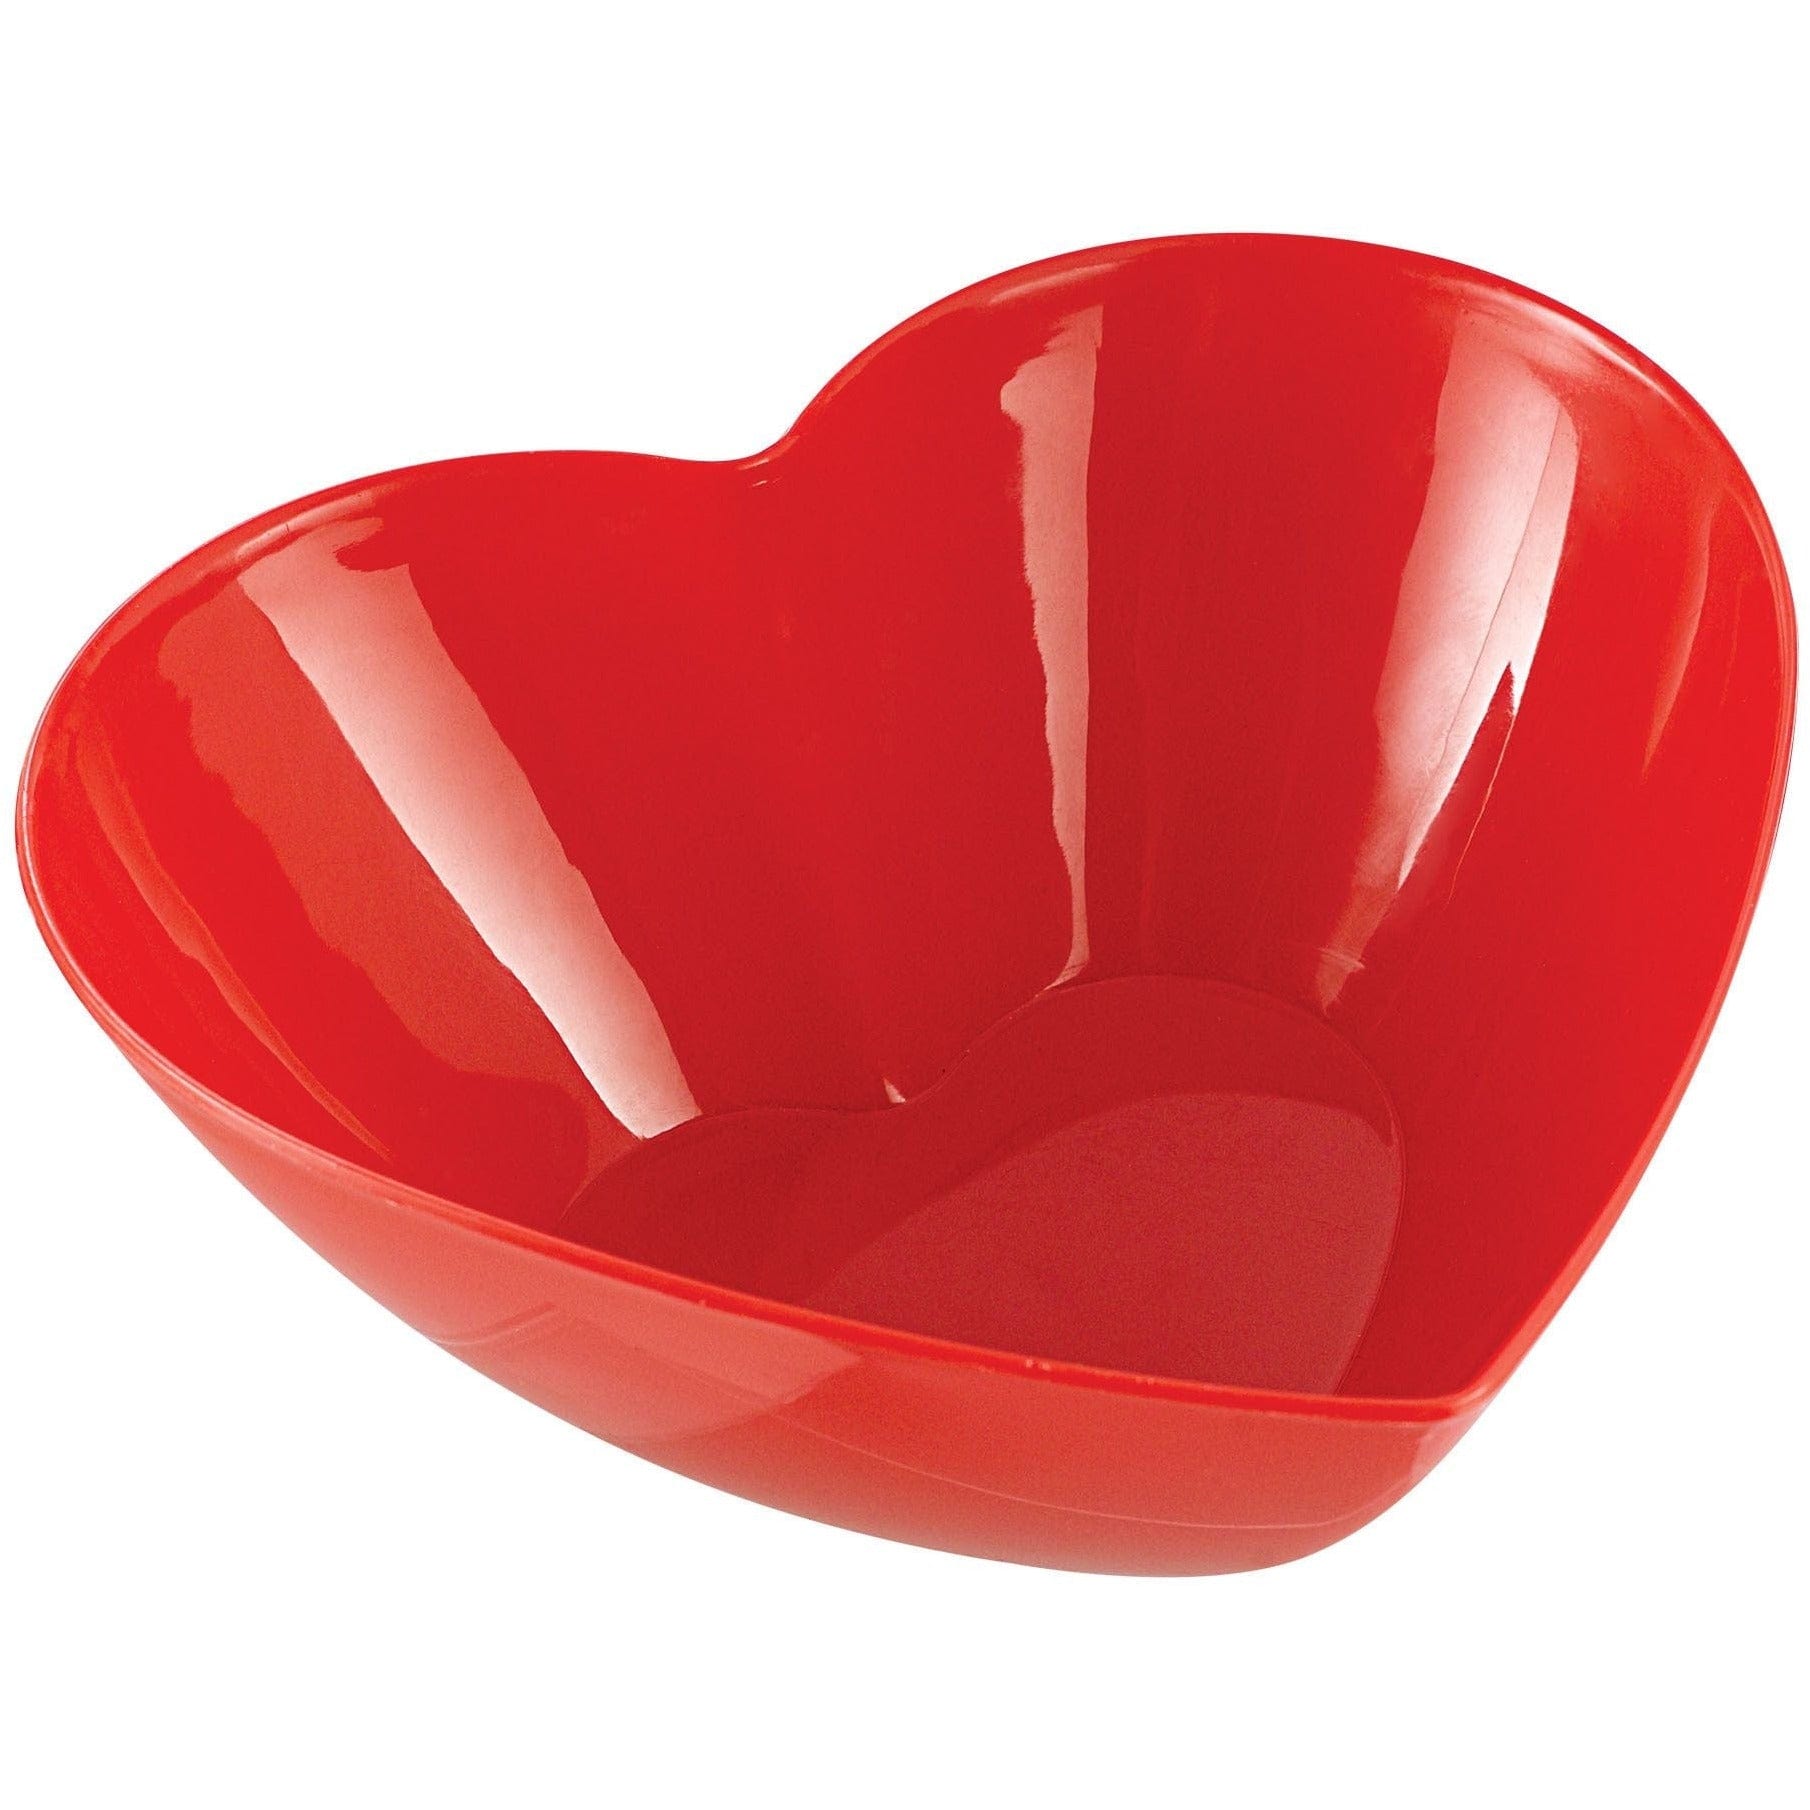 Amscan HOLIDAY: VALENTINES Valentines Heart Shaped Plastic Bowl, 42 oz.